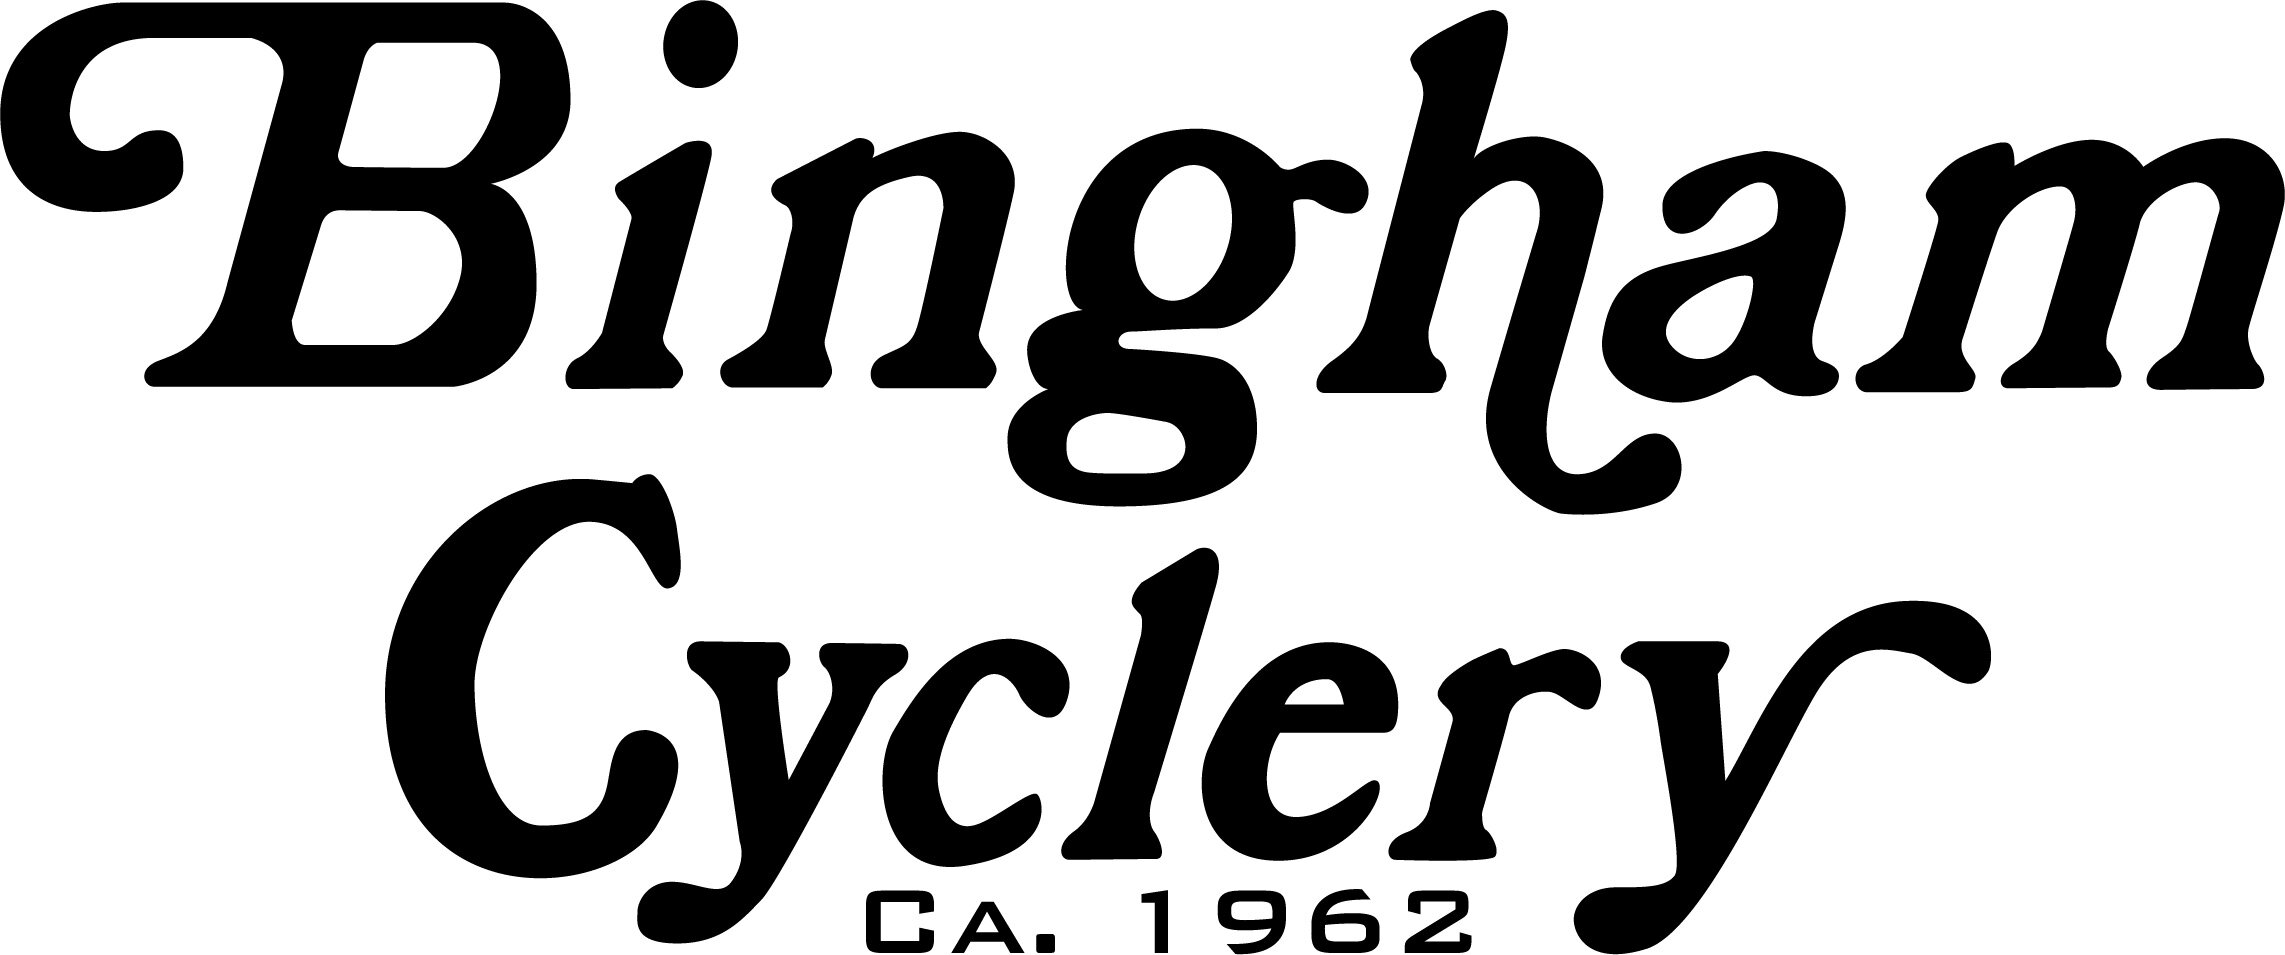 Huge thanks and high fives go to our presenting sponsor, Bingham Cyclery, and our supporting partner, Women MTB!  